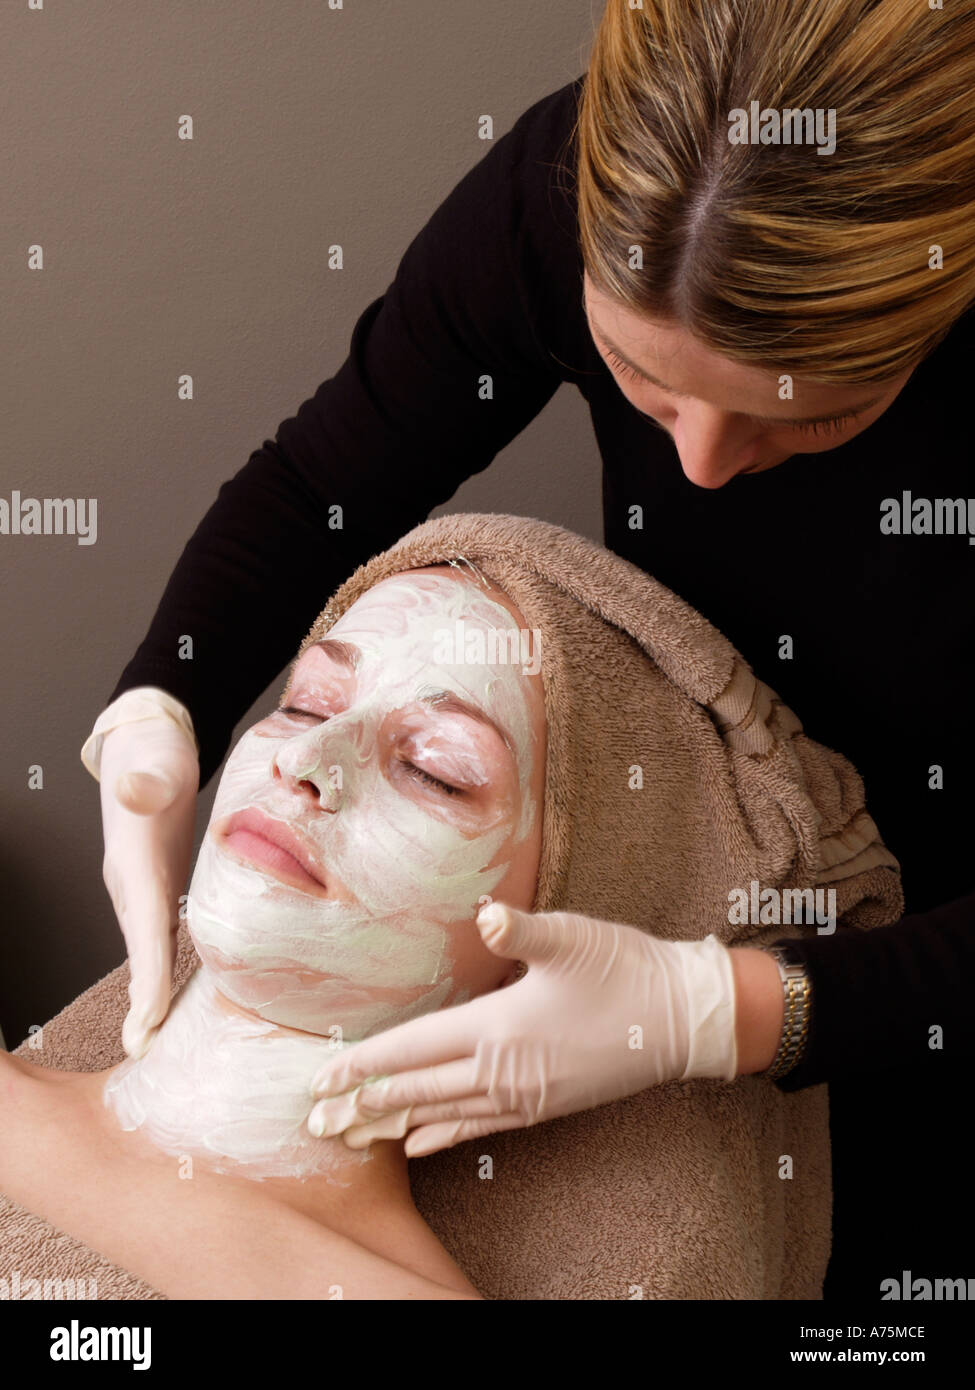 Female beautician applying skincare light green beauty mask to woman using surgical gloves Stock Photo